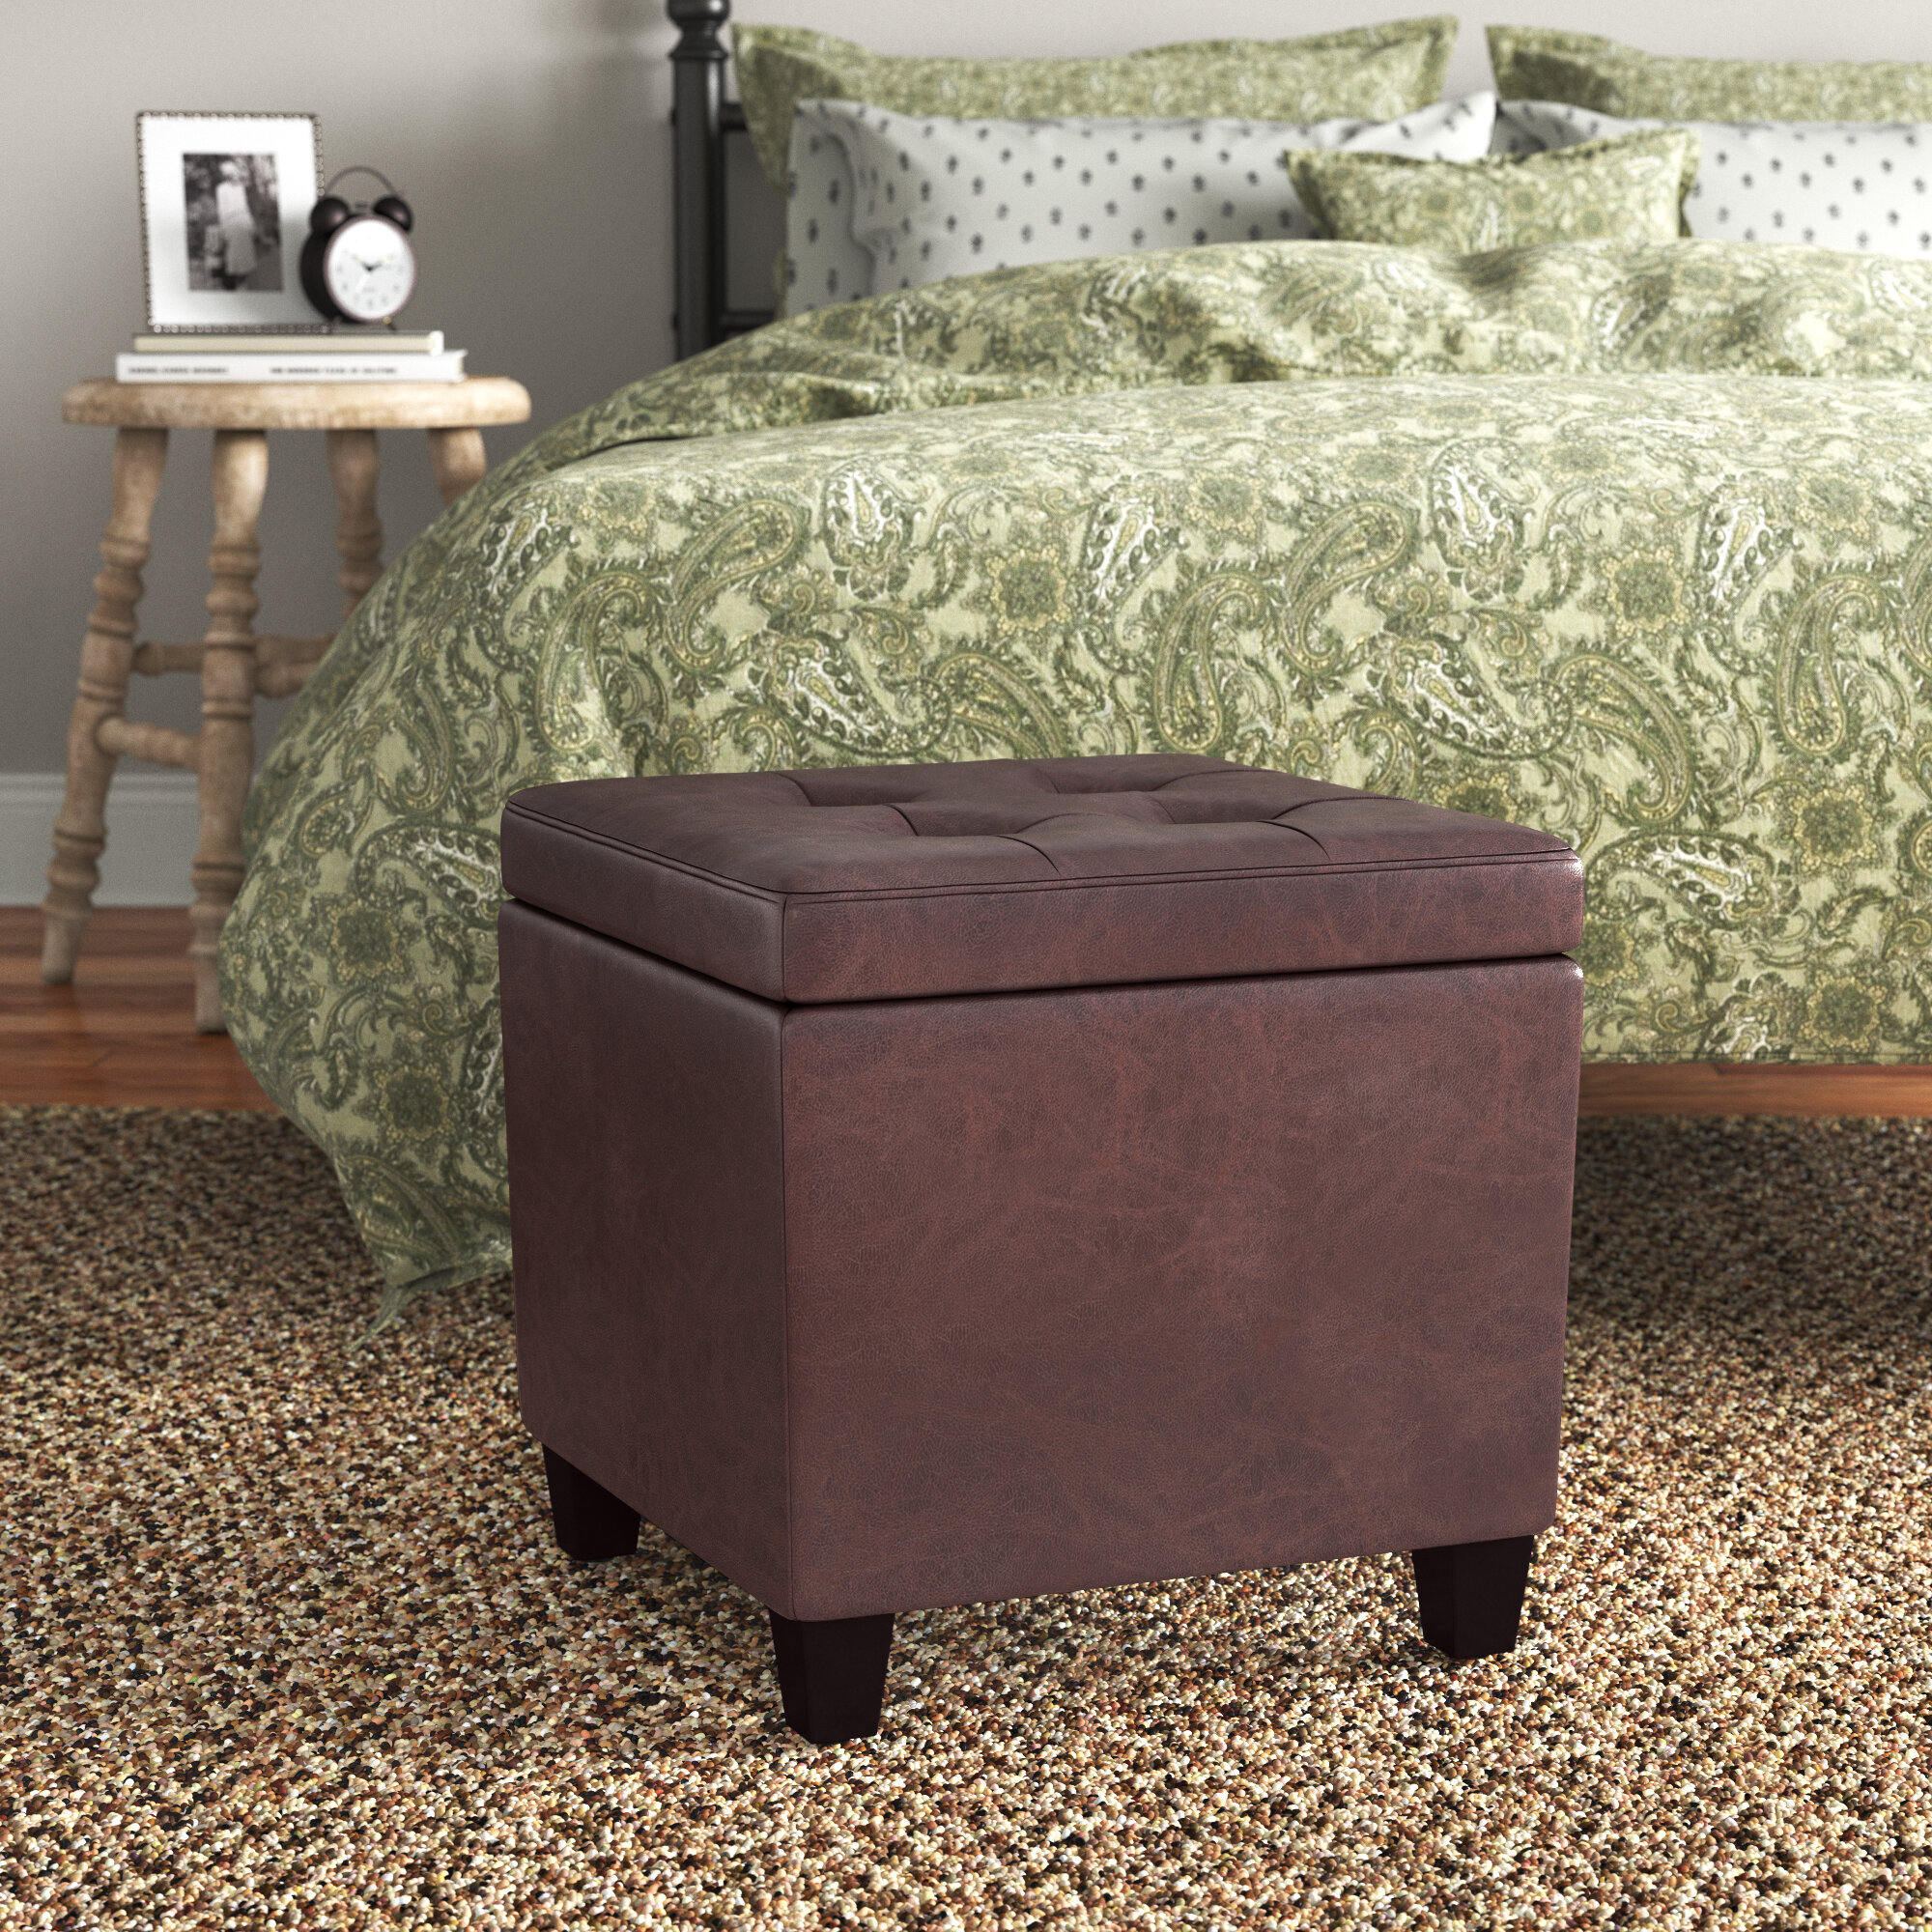 Decent Home Brown Leather Ottoman with Storage,17.5 x 17.5 x 15